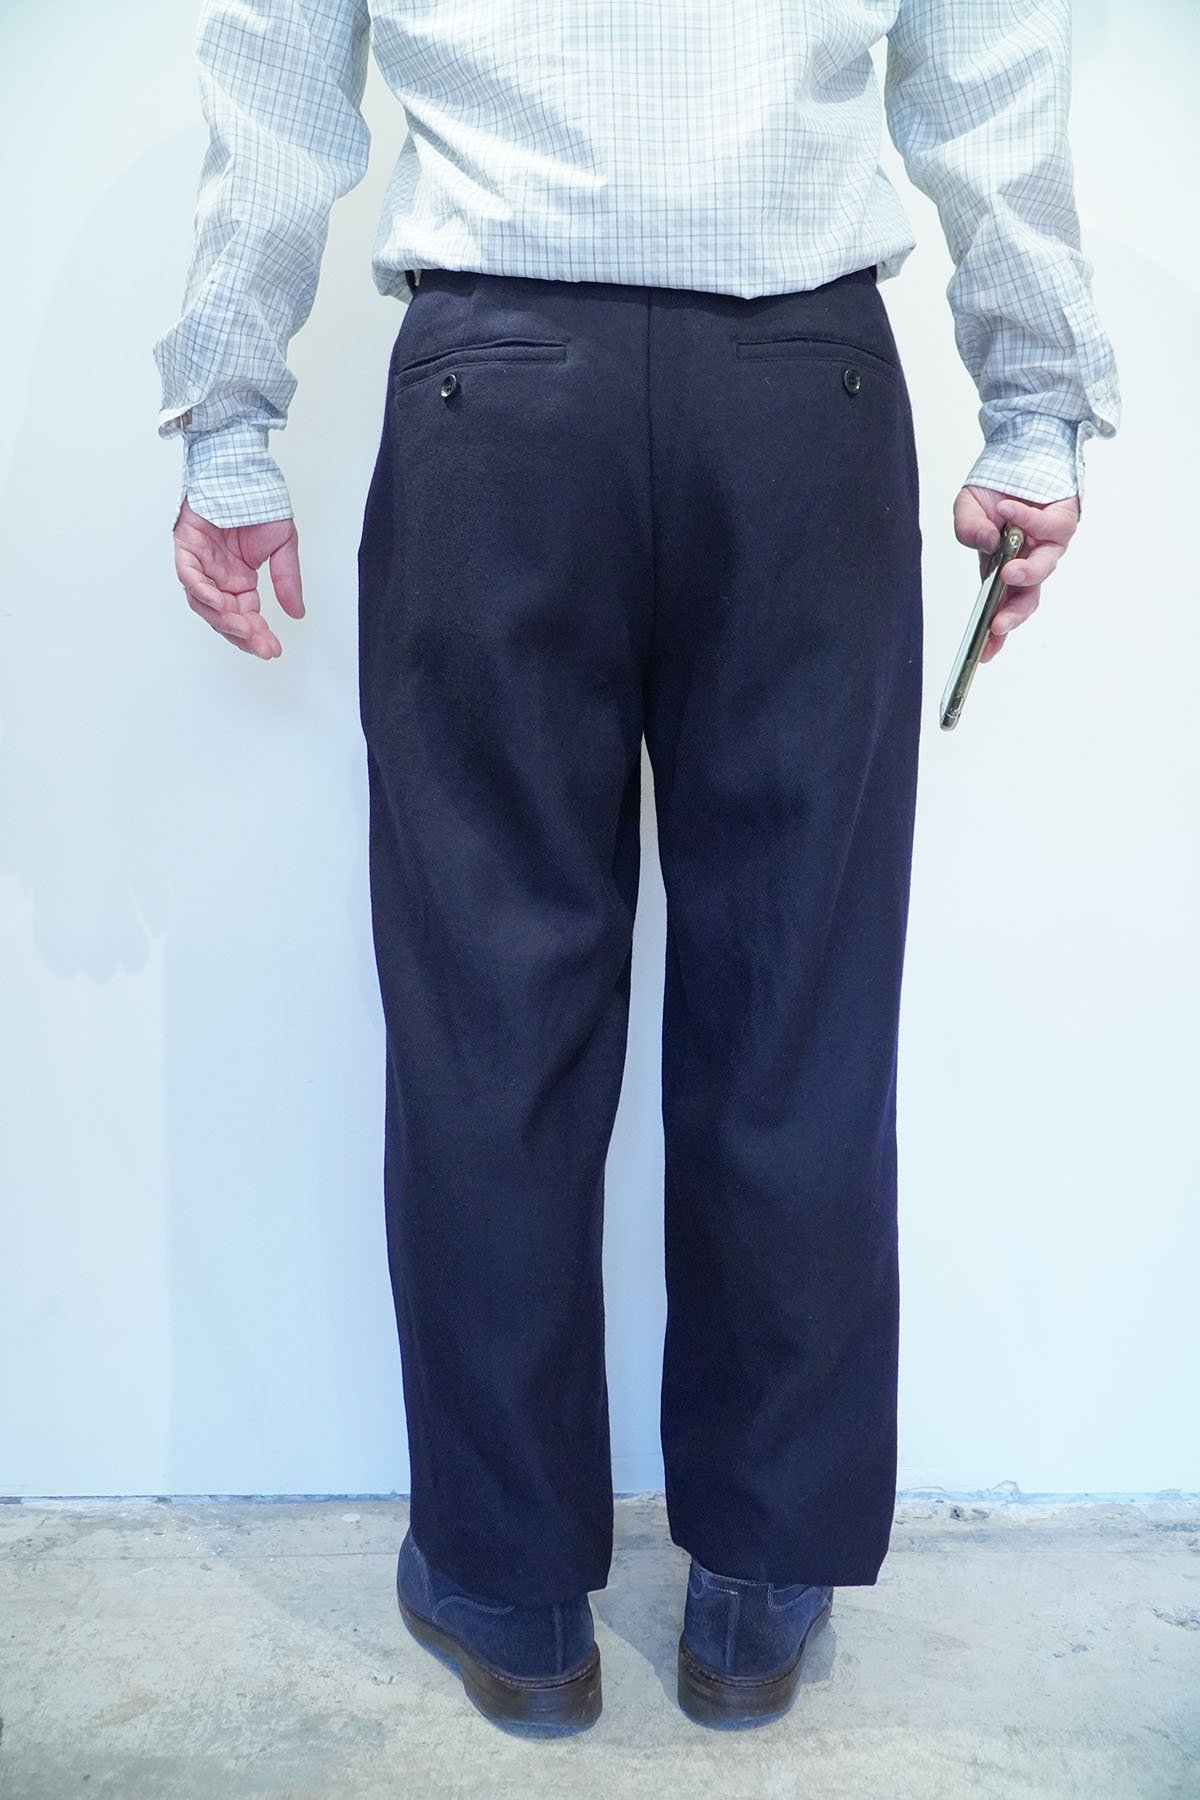 SOWBOW woolserge trousers fitting back